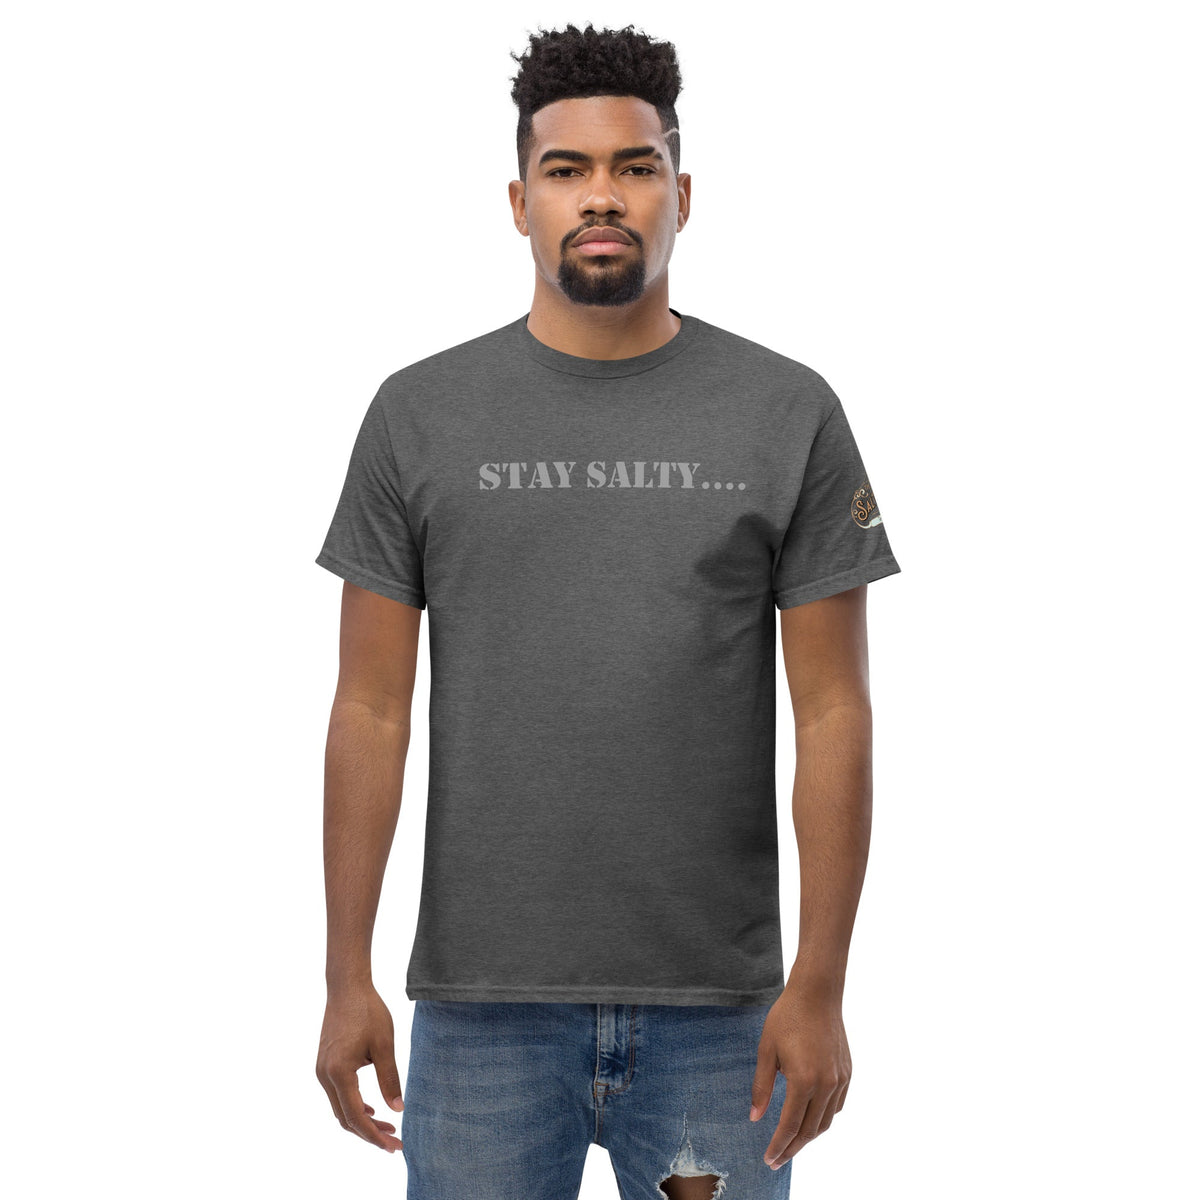 Stay Salty Men's classic tee - Salty Medic Clothing Co.